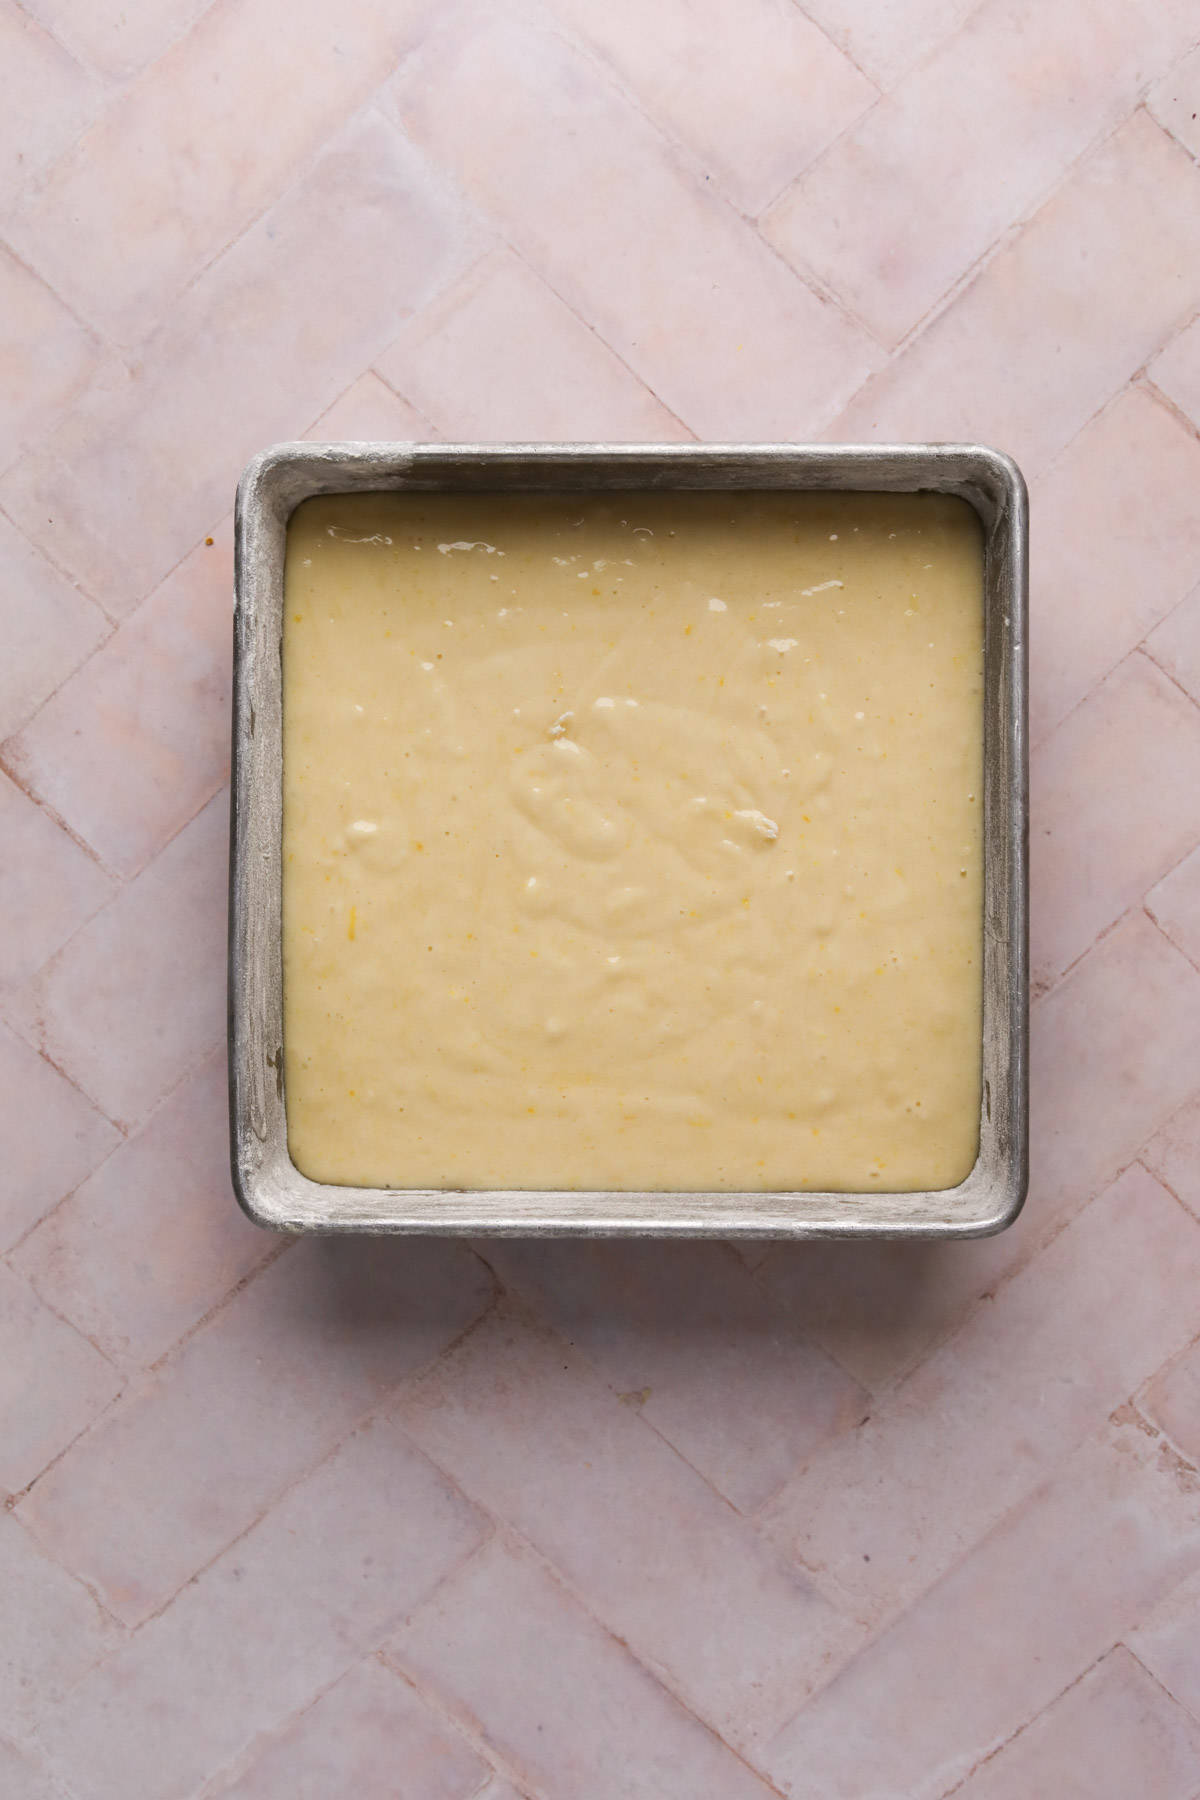 Lemon cake batter in a greased and flour 8x8 square cake pan.